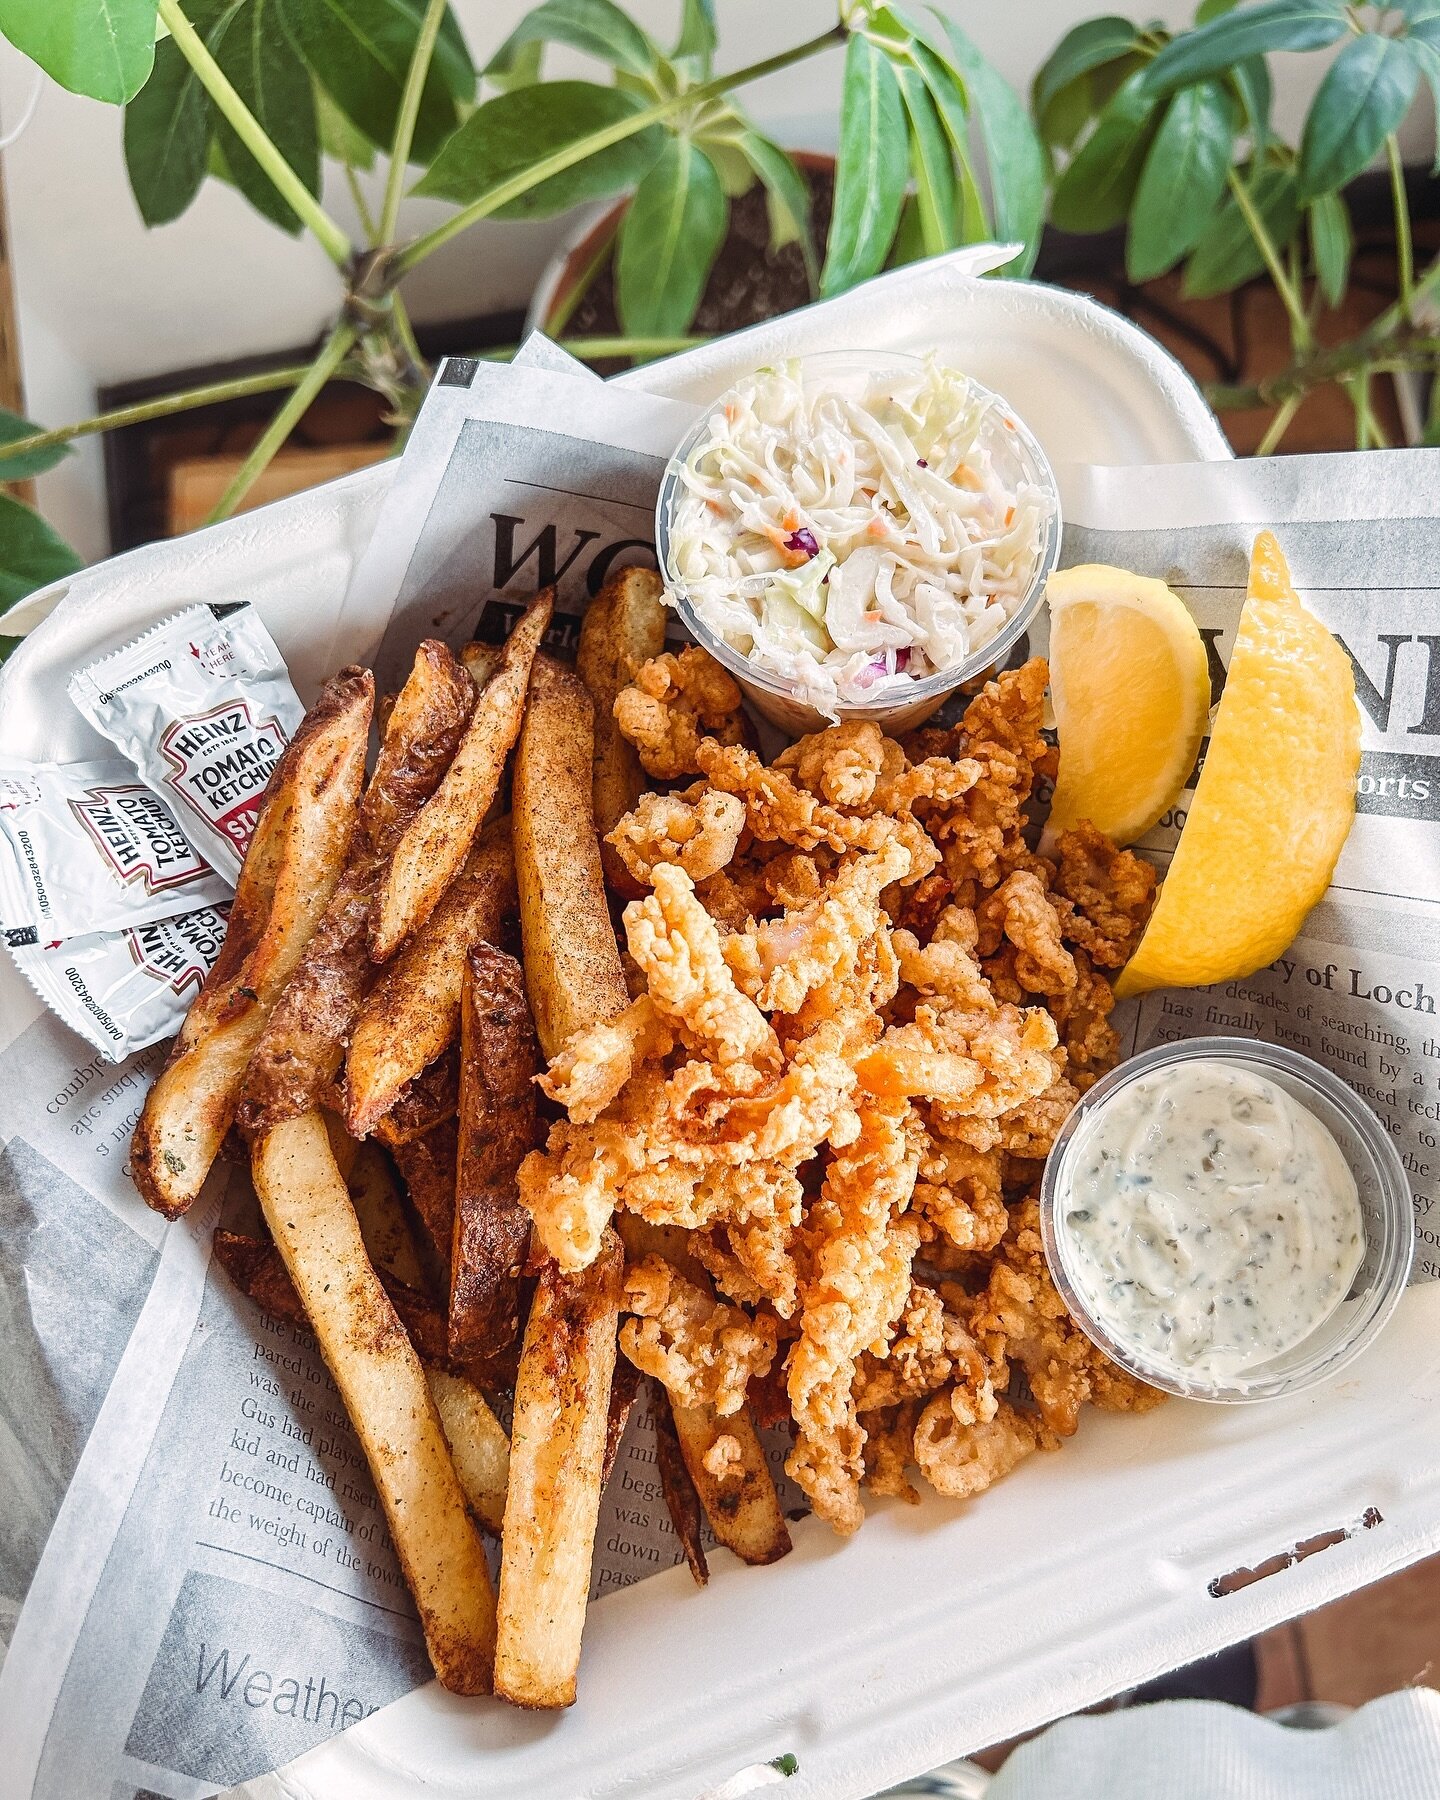 ✨N E W✨ Fried Clam Strip Dinner 🙌🏼 just in time to kick off another FRYDAY! Our full menu is available 12-7pm - order online, give us a call or stop by and place your order! ⁣
⁣
⁣
⁣
⁣
#jrseafoodmarket #mysticeats #fryday #lentenseason #lentfridays 